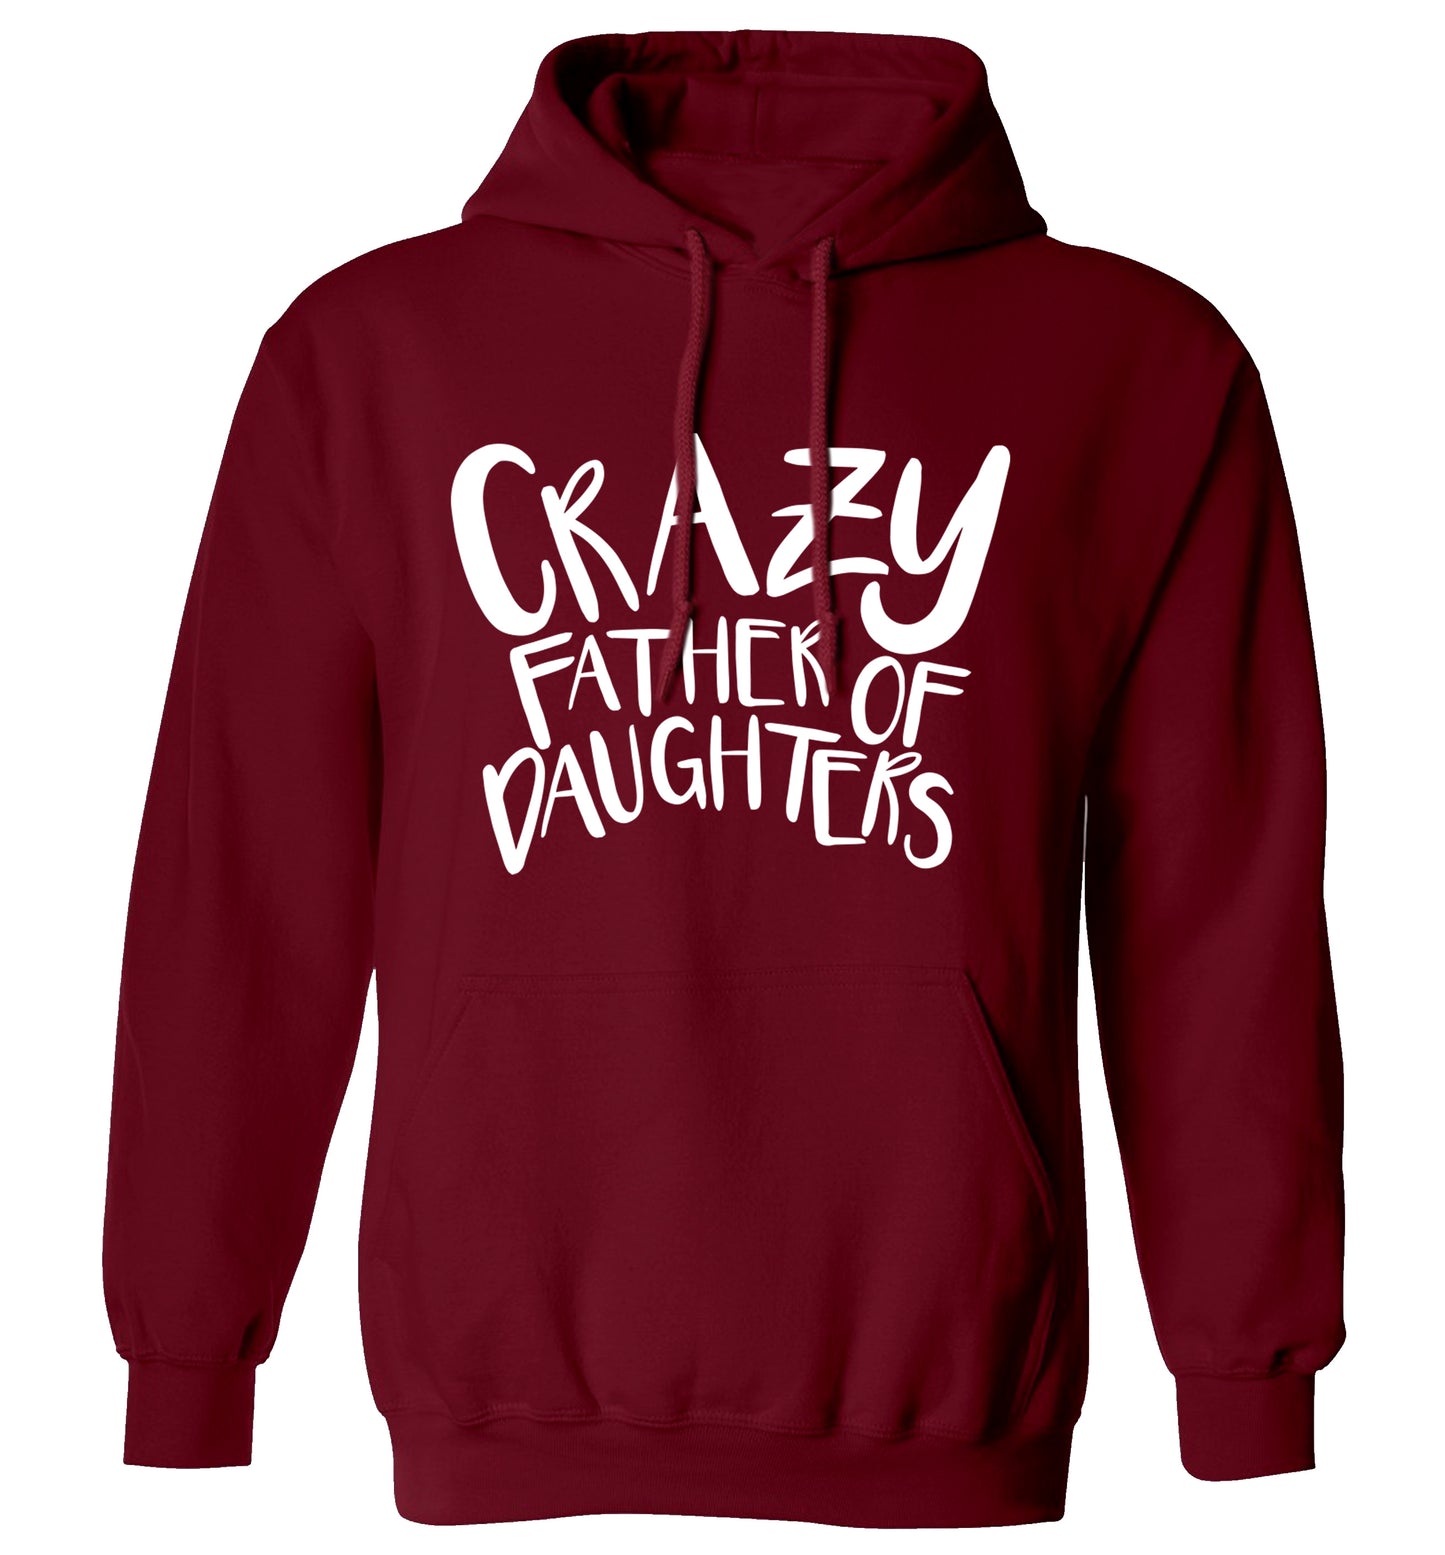 Crazy father of daughters adults unisex maroon hoodie 2XL